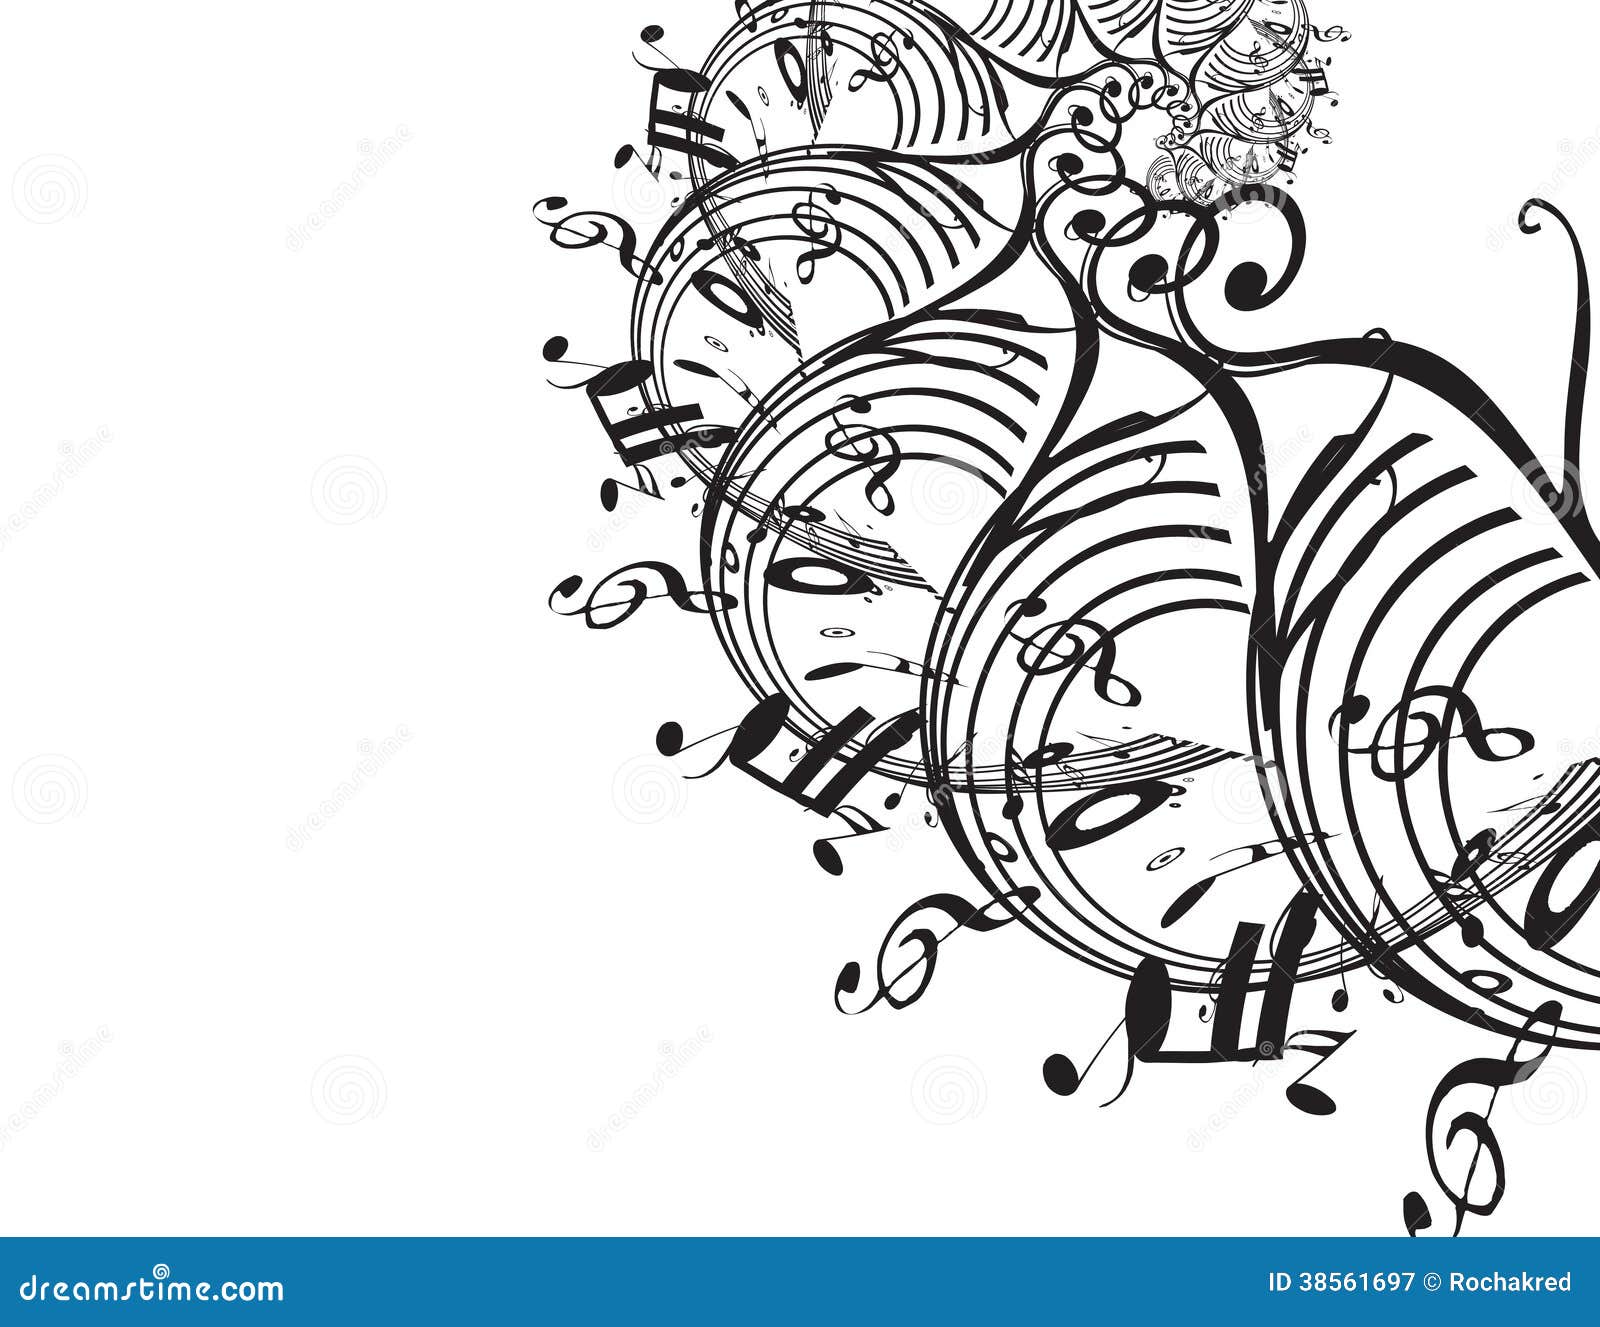 Abstract musical notes background for design use